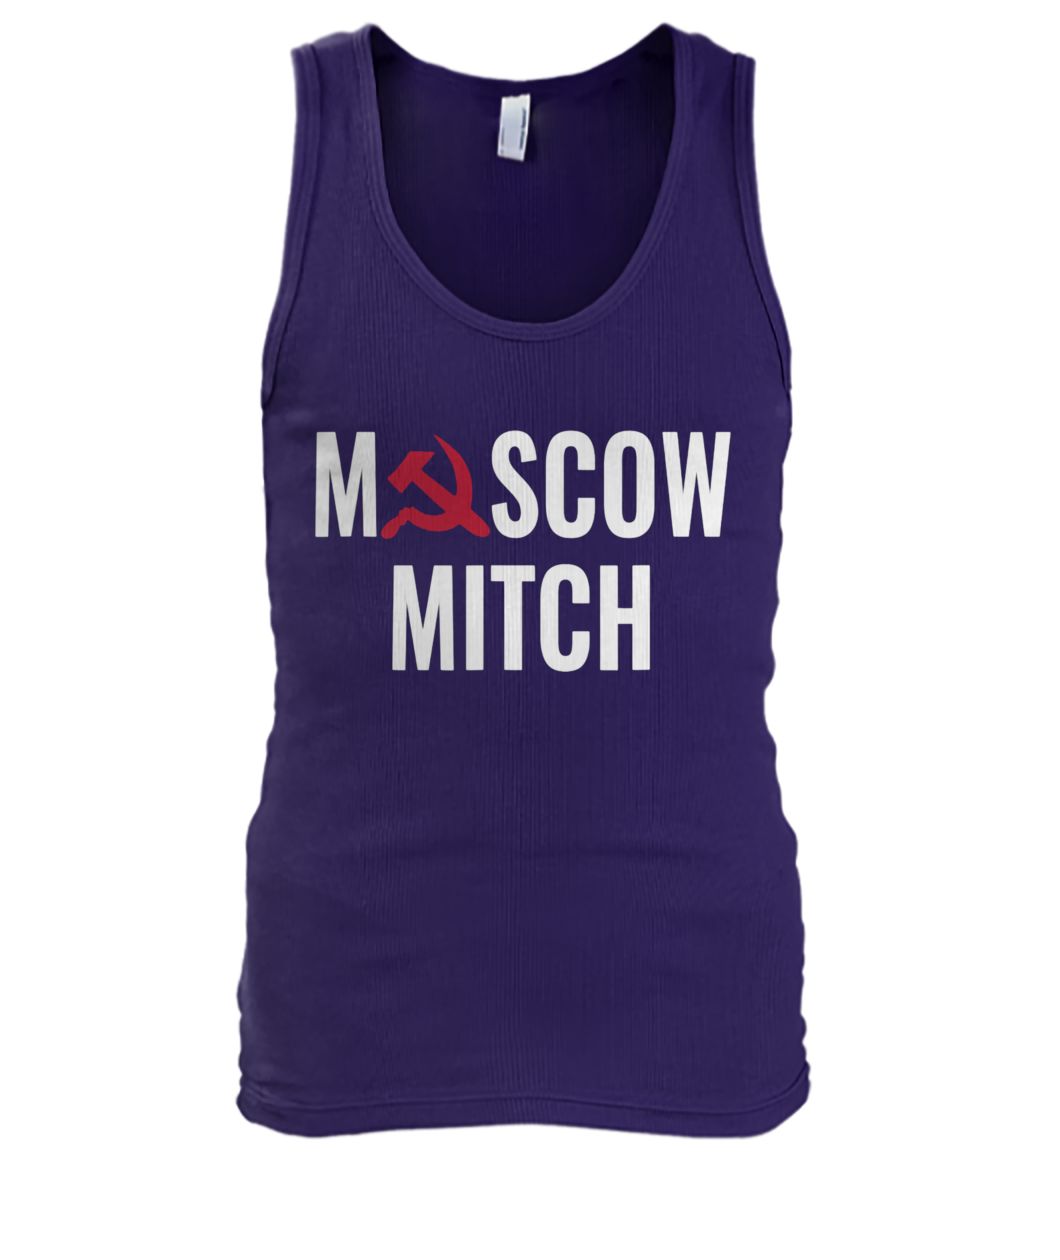 Moscow mitch traitor men's tank top